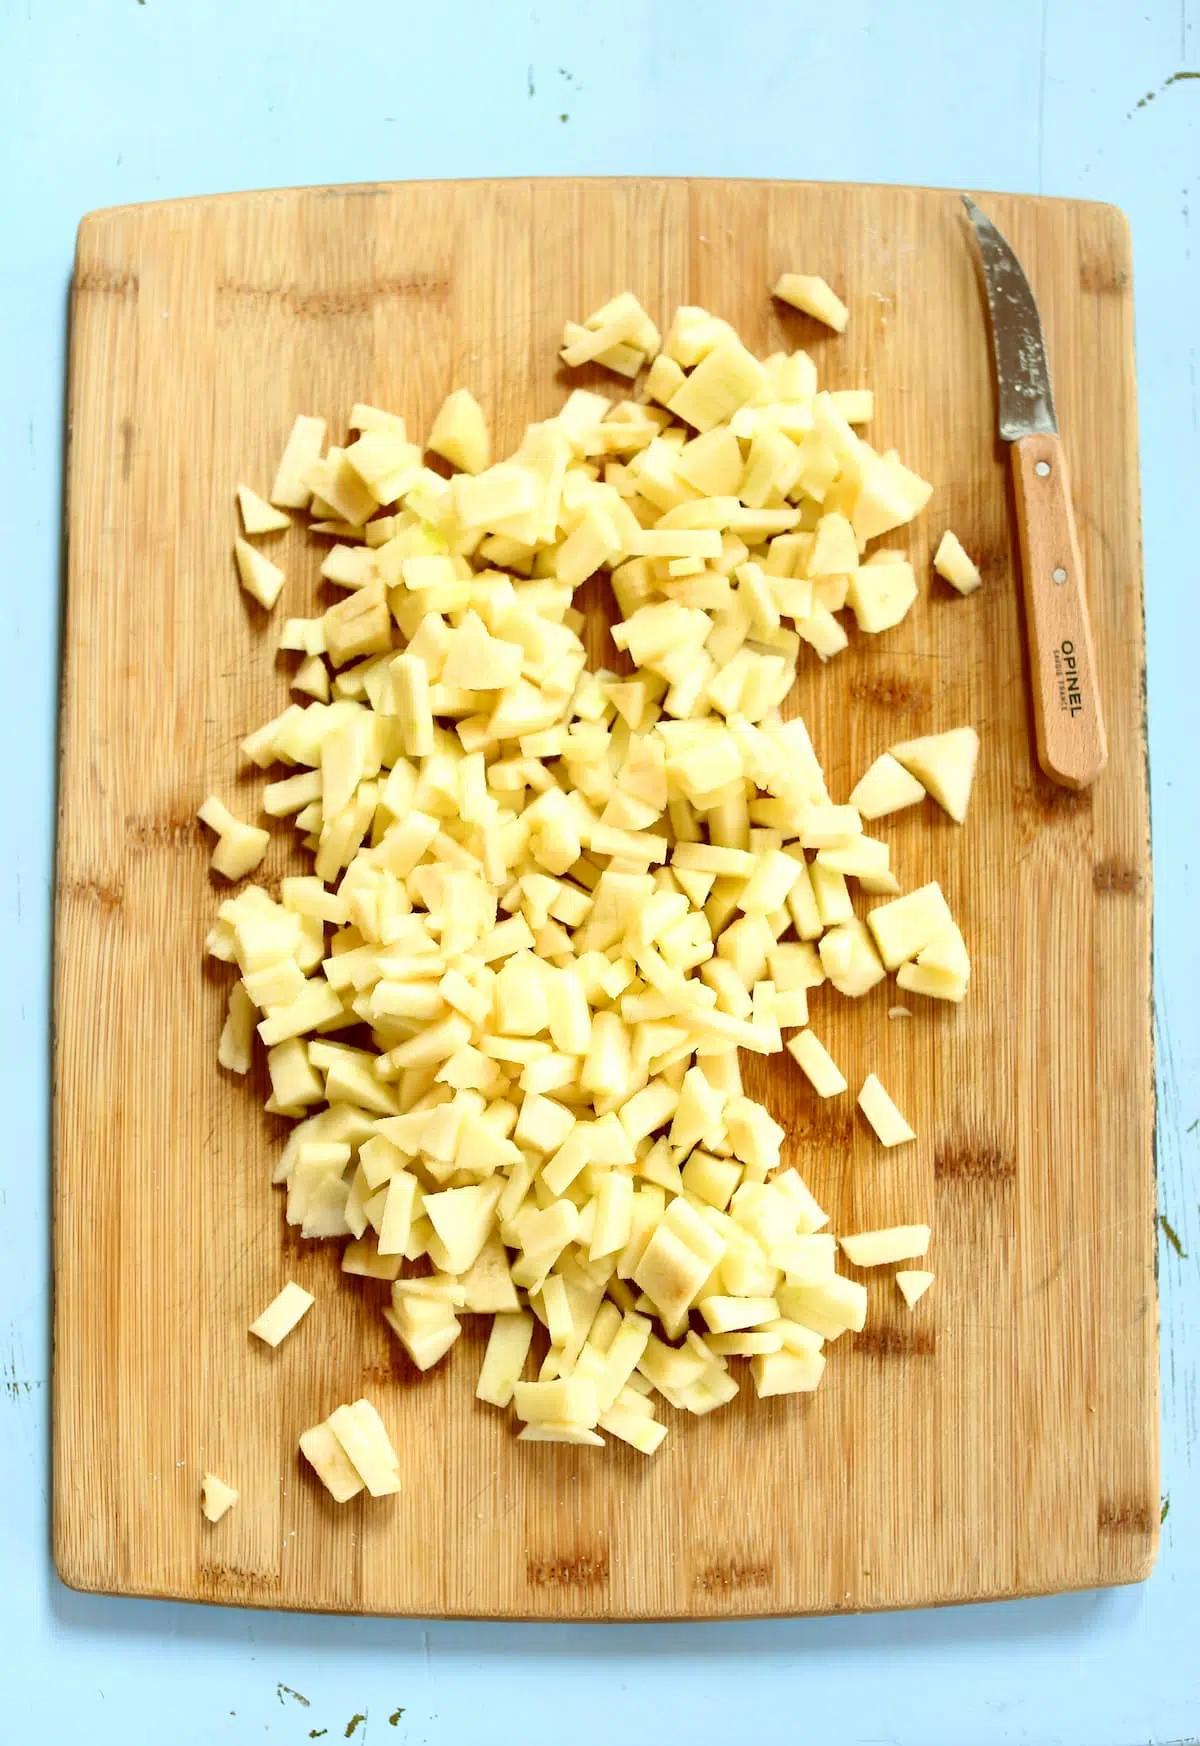 a cutting board of cut up apples.